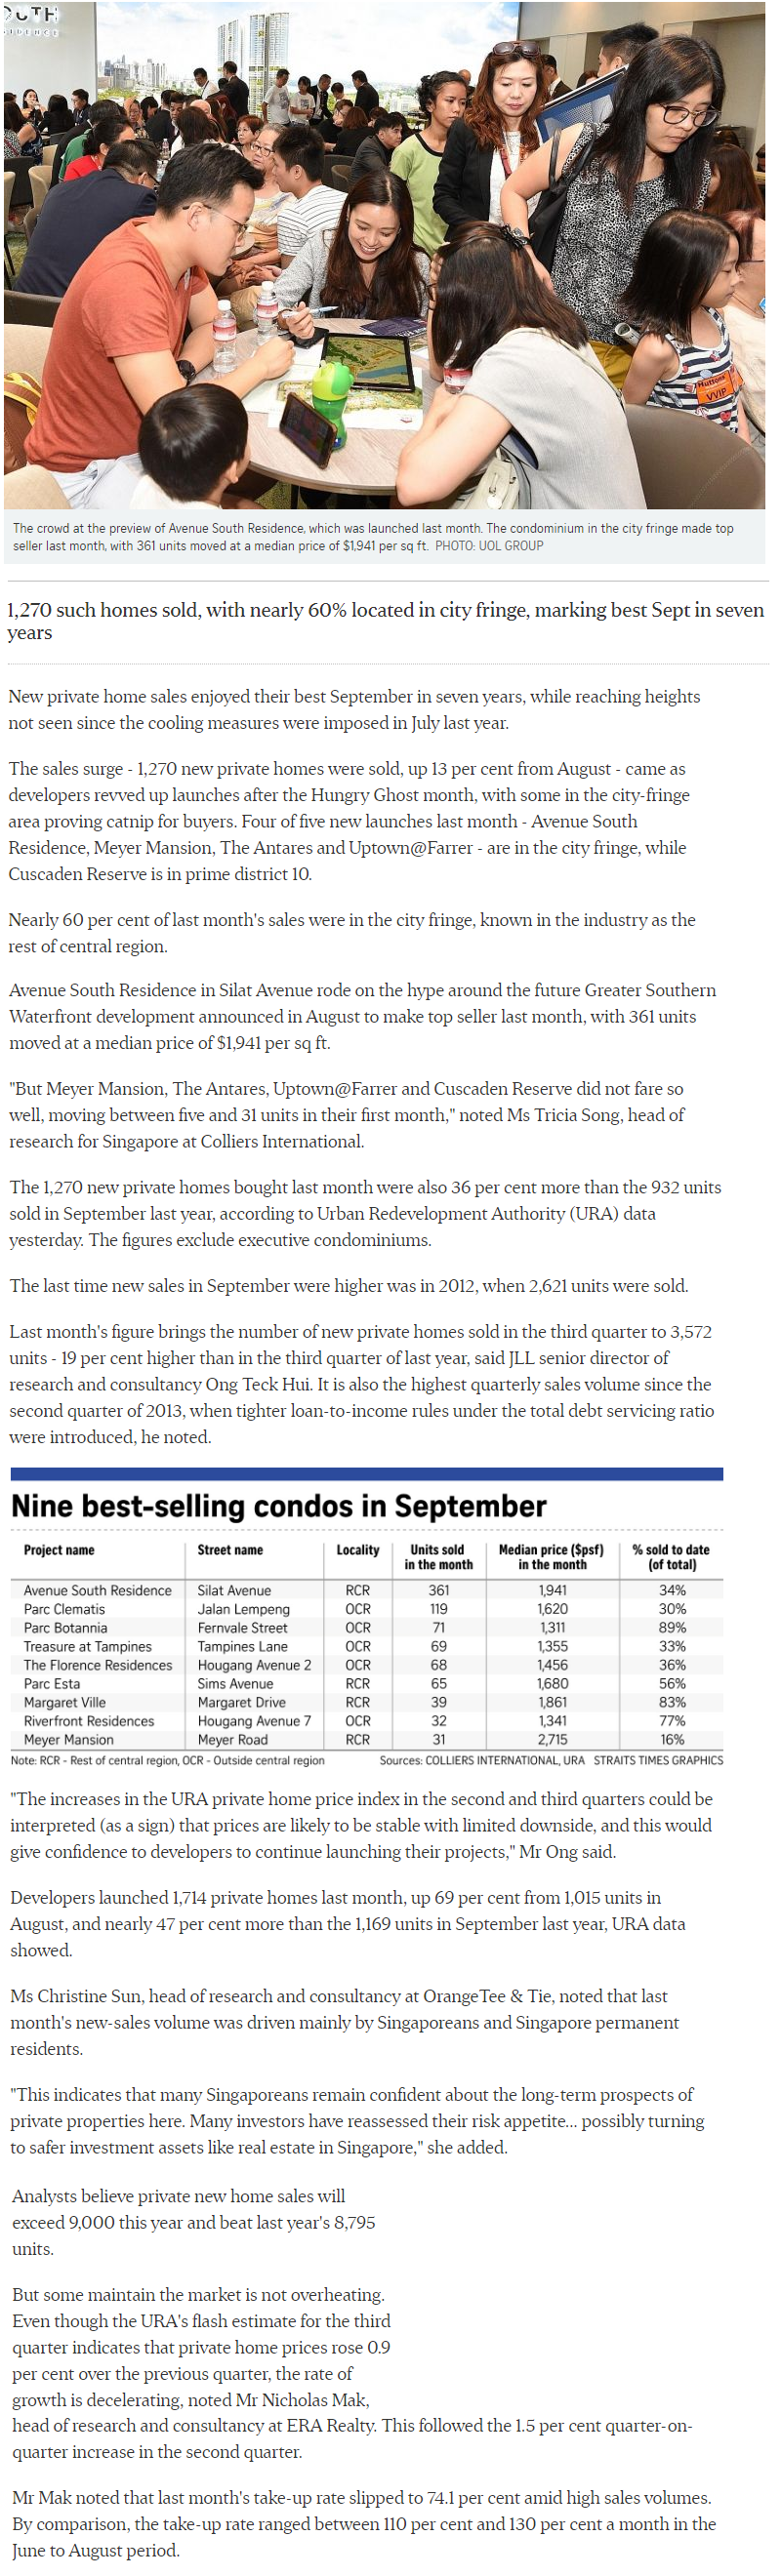 Grange 1866 - New private Home Sales Hit A Hight In September